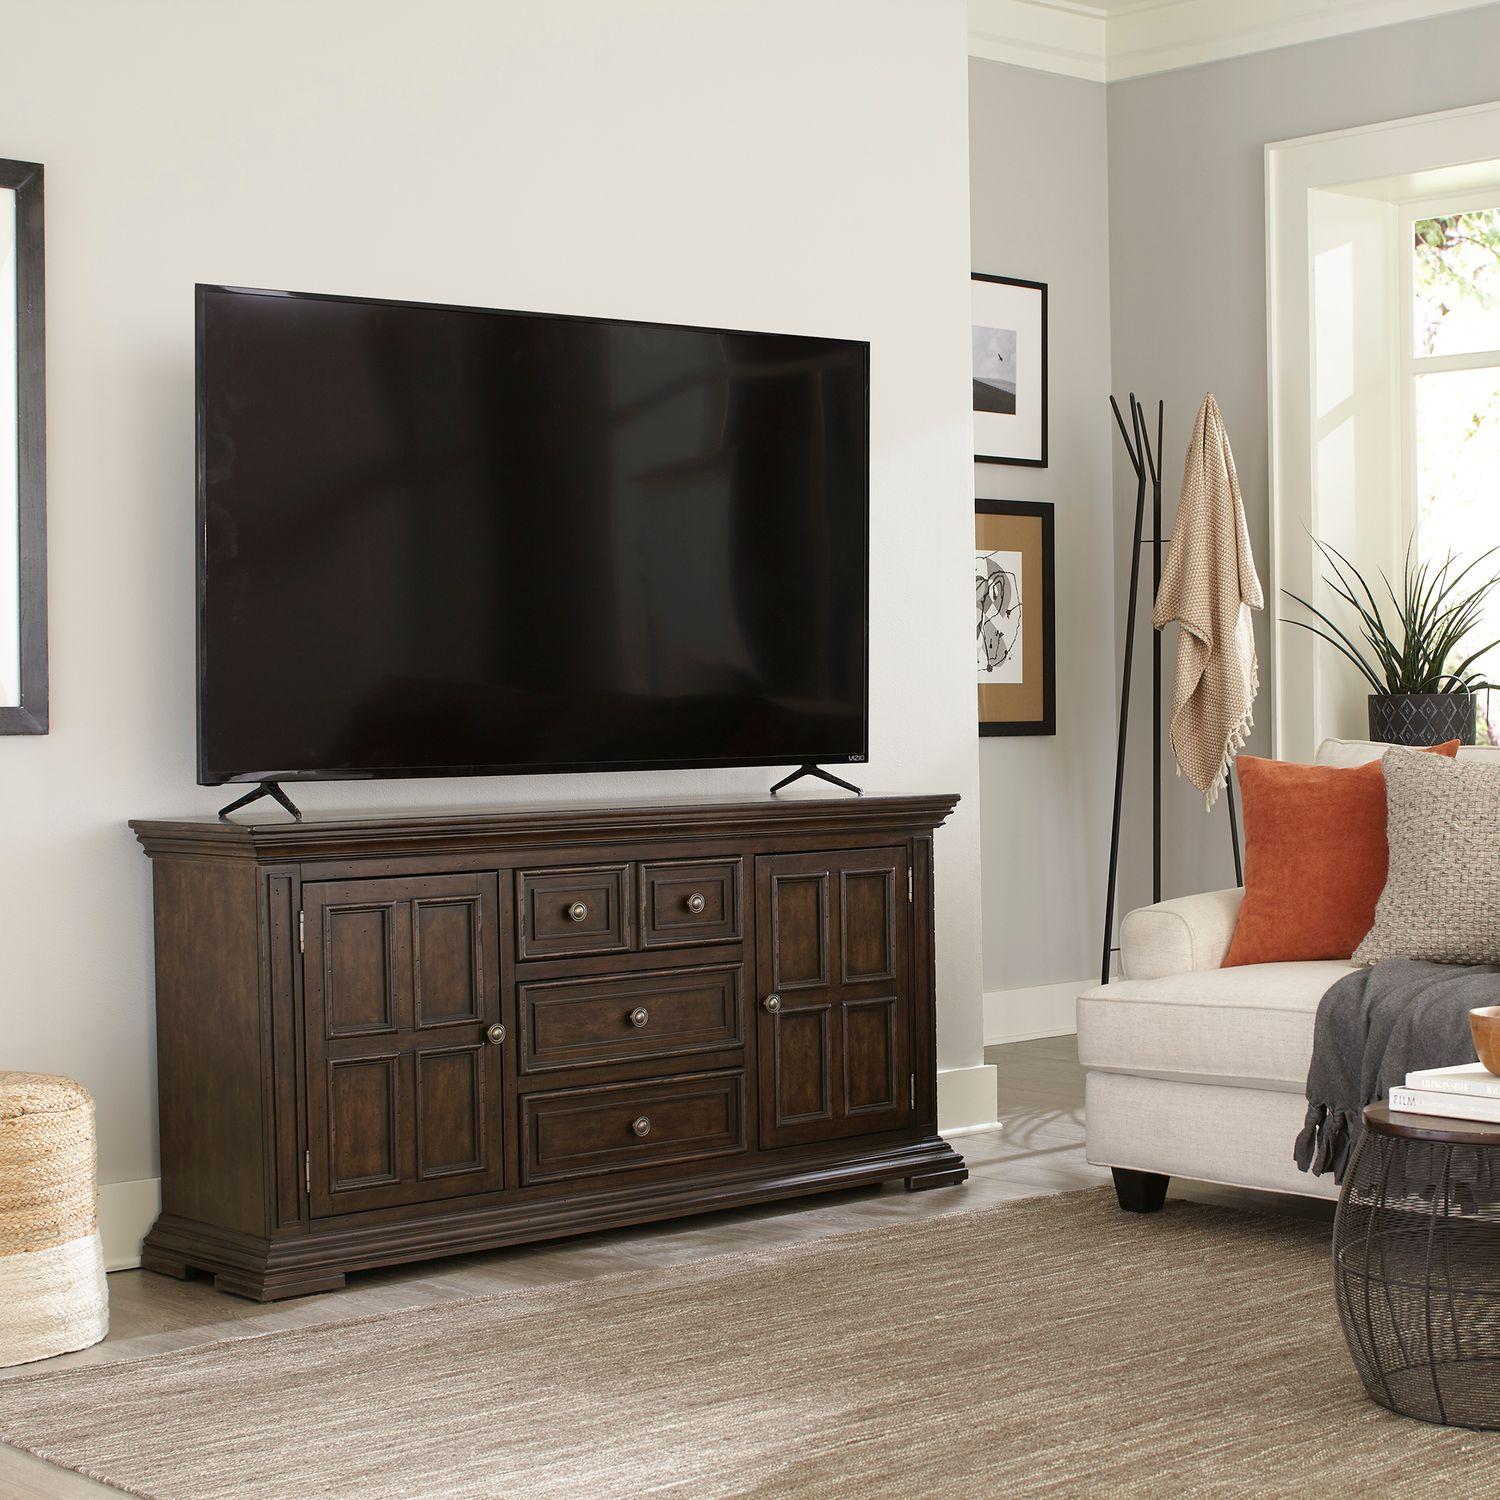 Transitional Tv Console Big Valley 361-TV76 361-TV76 in Brown 